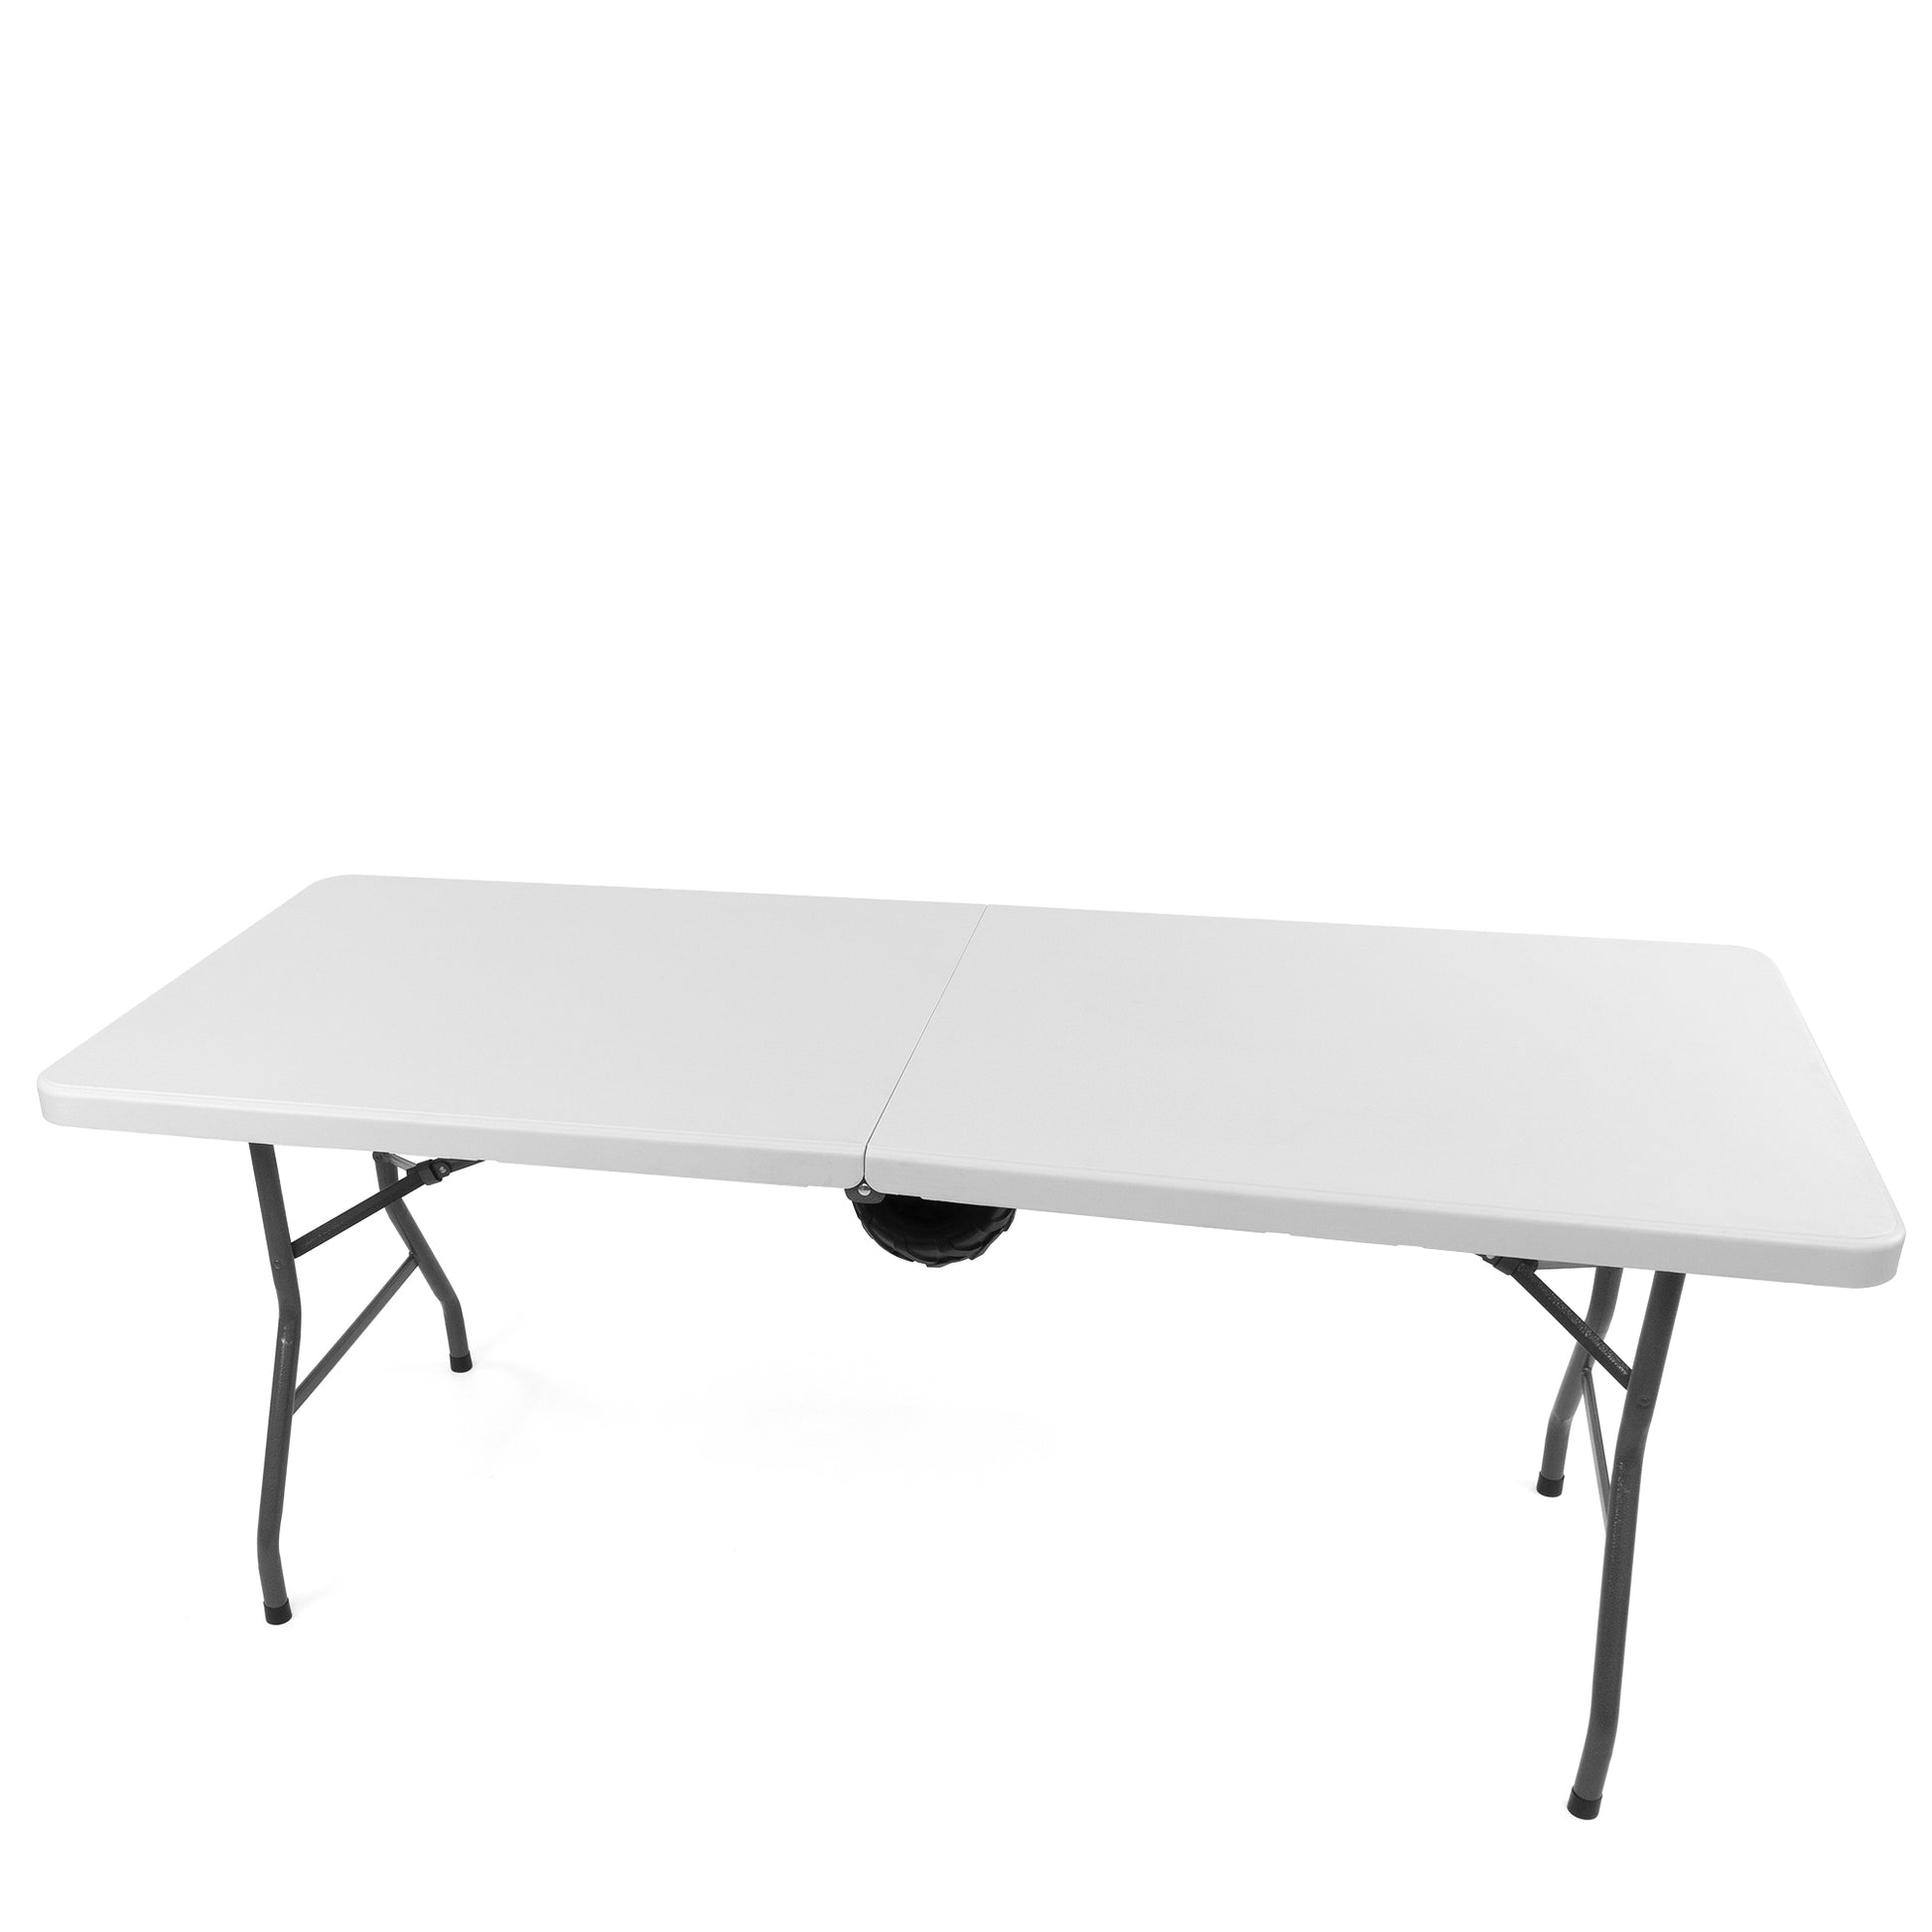 top-foldable-table-and-chair-the-rolling-table